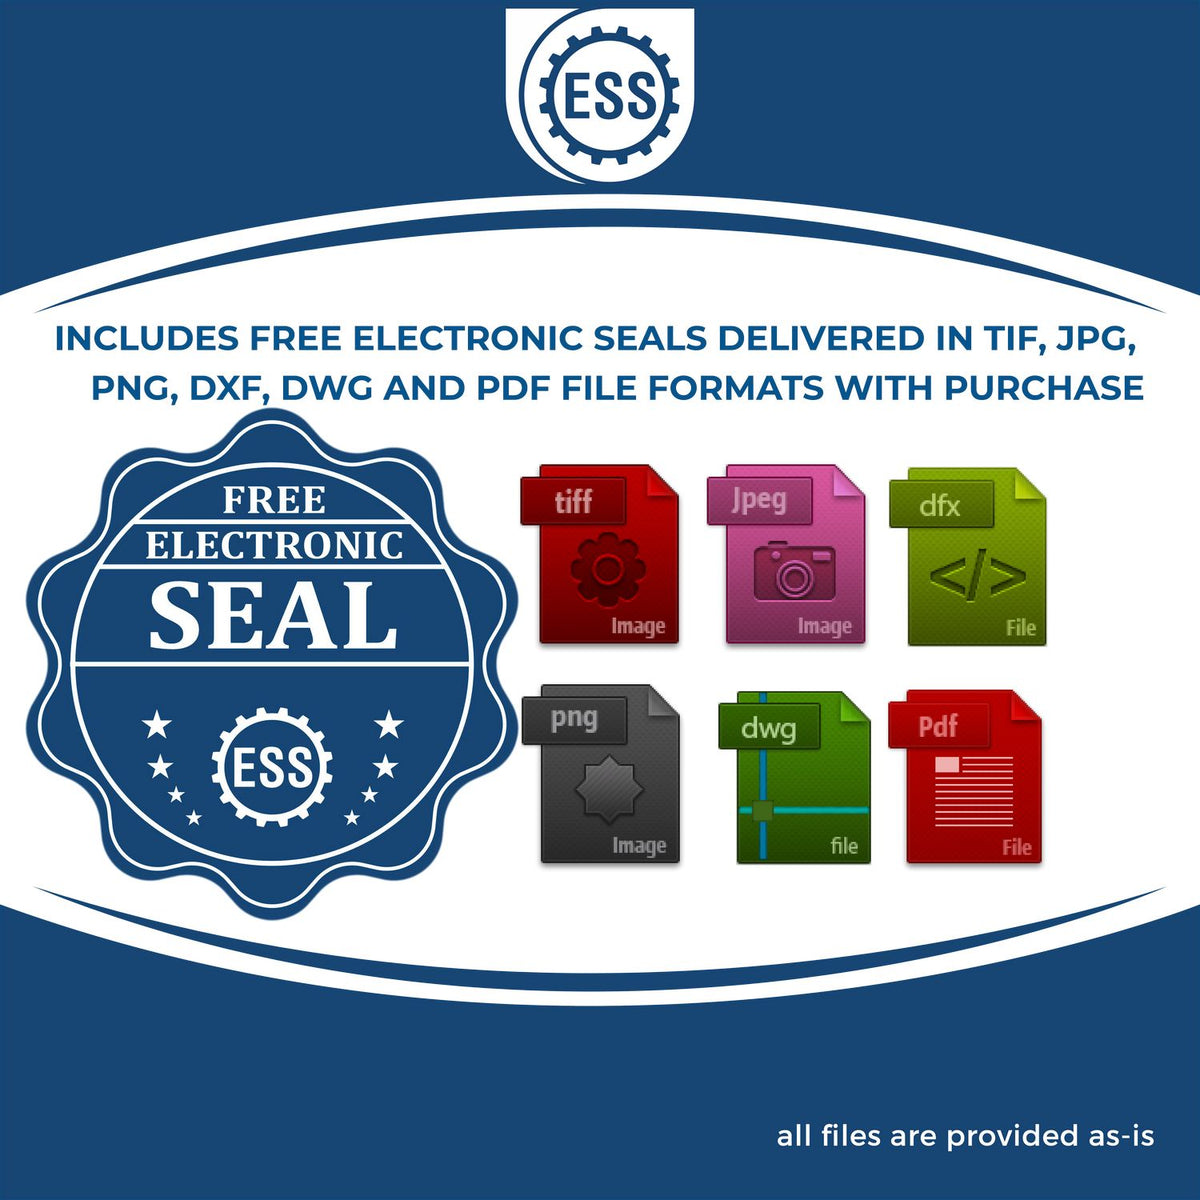 An infographic for the free electronic seal for the Massachusetts Engineer Desk Seal illustrating the different file type icons such as DXF, DWG, TIF, JPG and PNG.